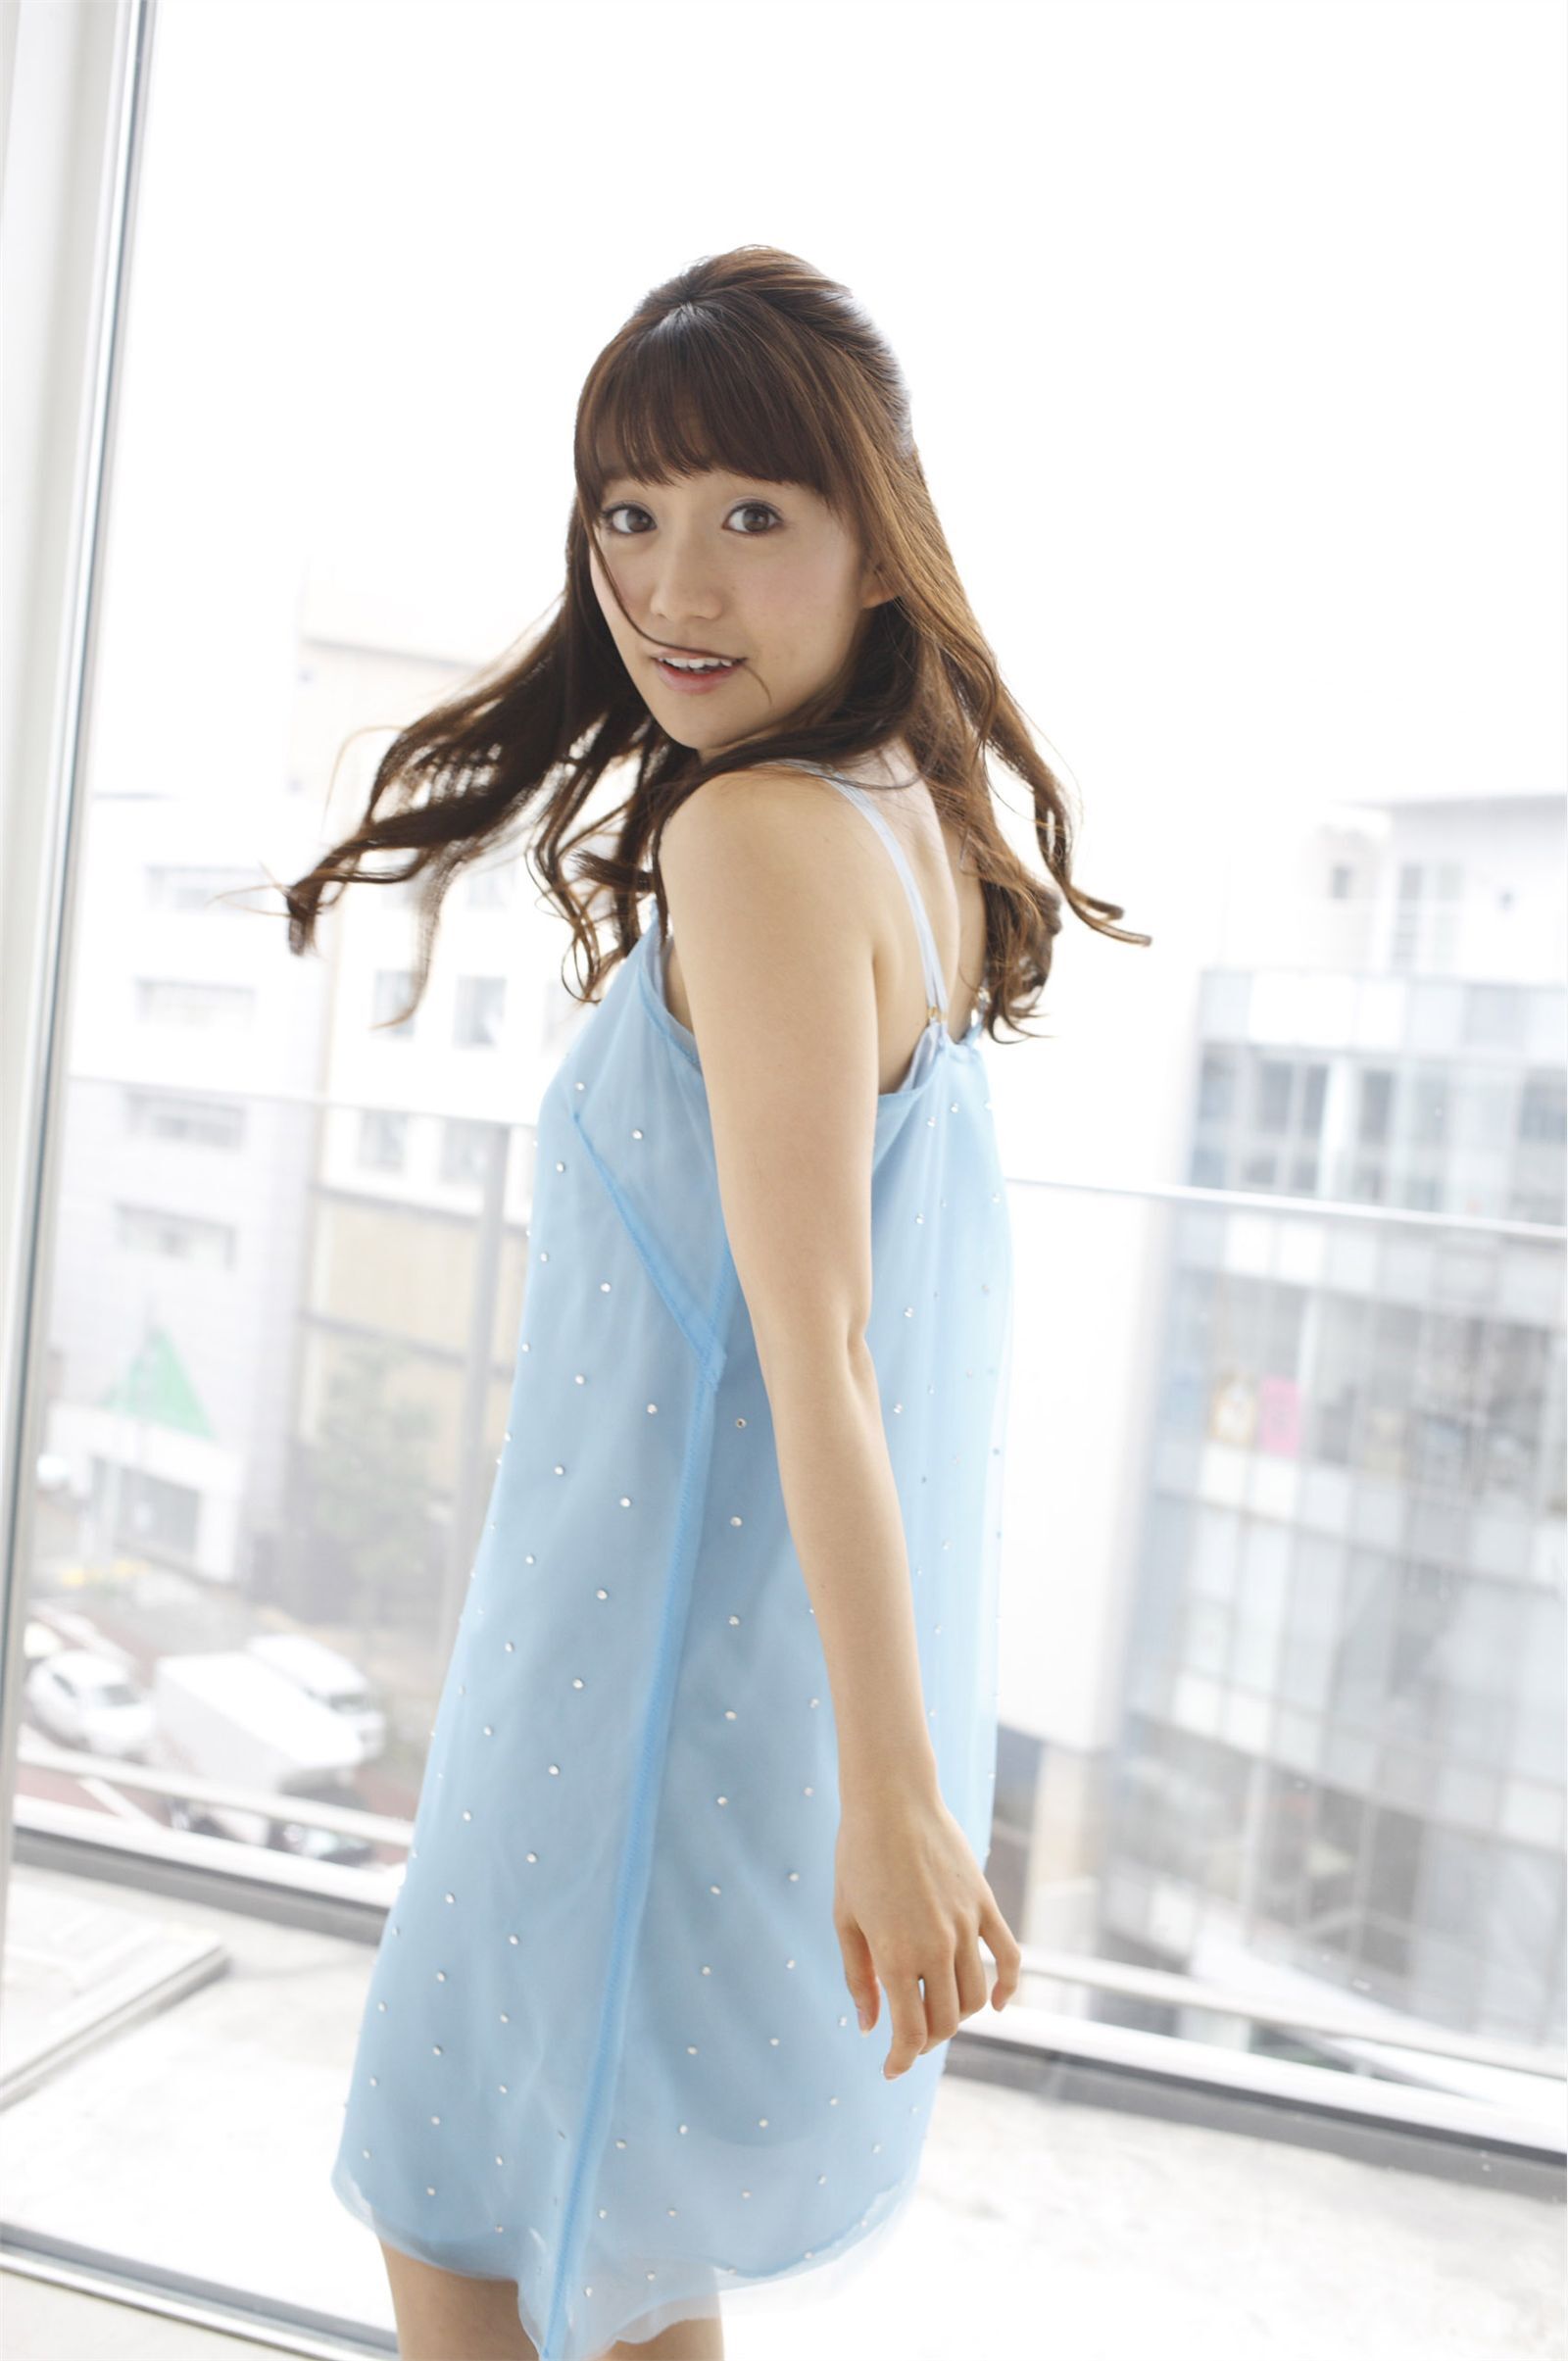 [WPB net] 2013.01.30 No.135 pictures of Japanese beauties